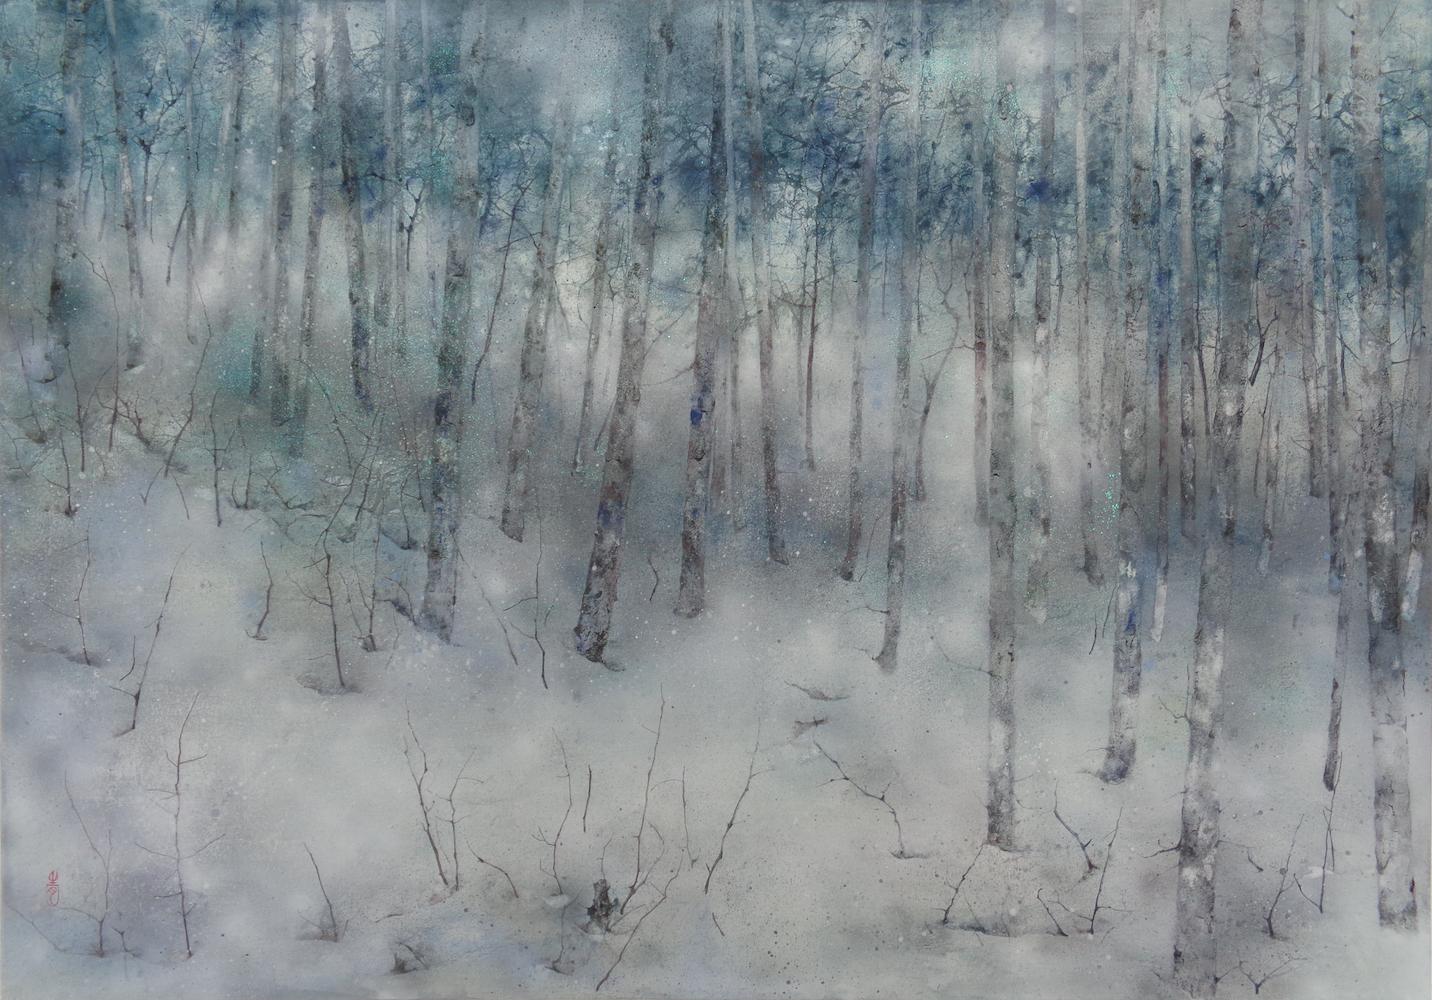 Yiching Chen Figurative Painting - Solitude by Chen Yiching - Contemporary nihonga painting, forest, green trees